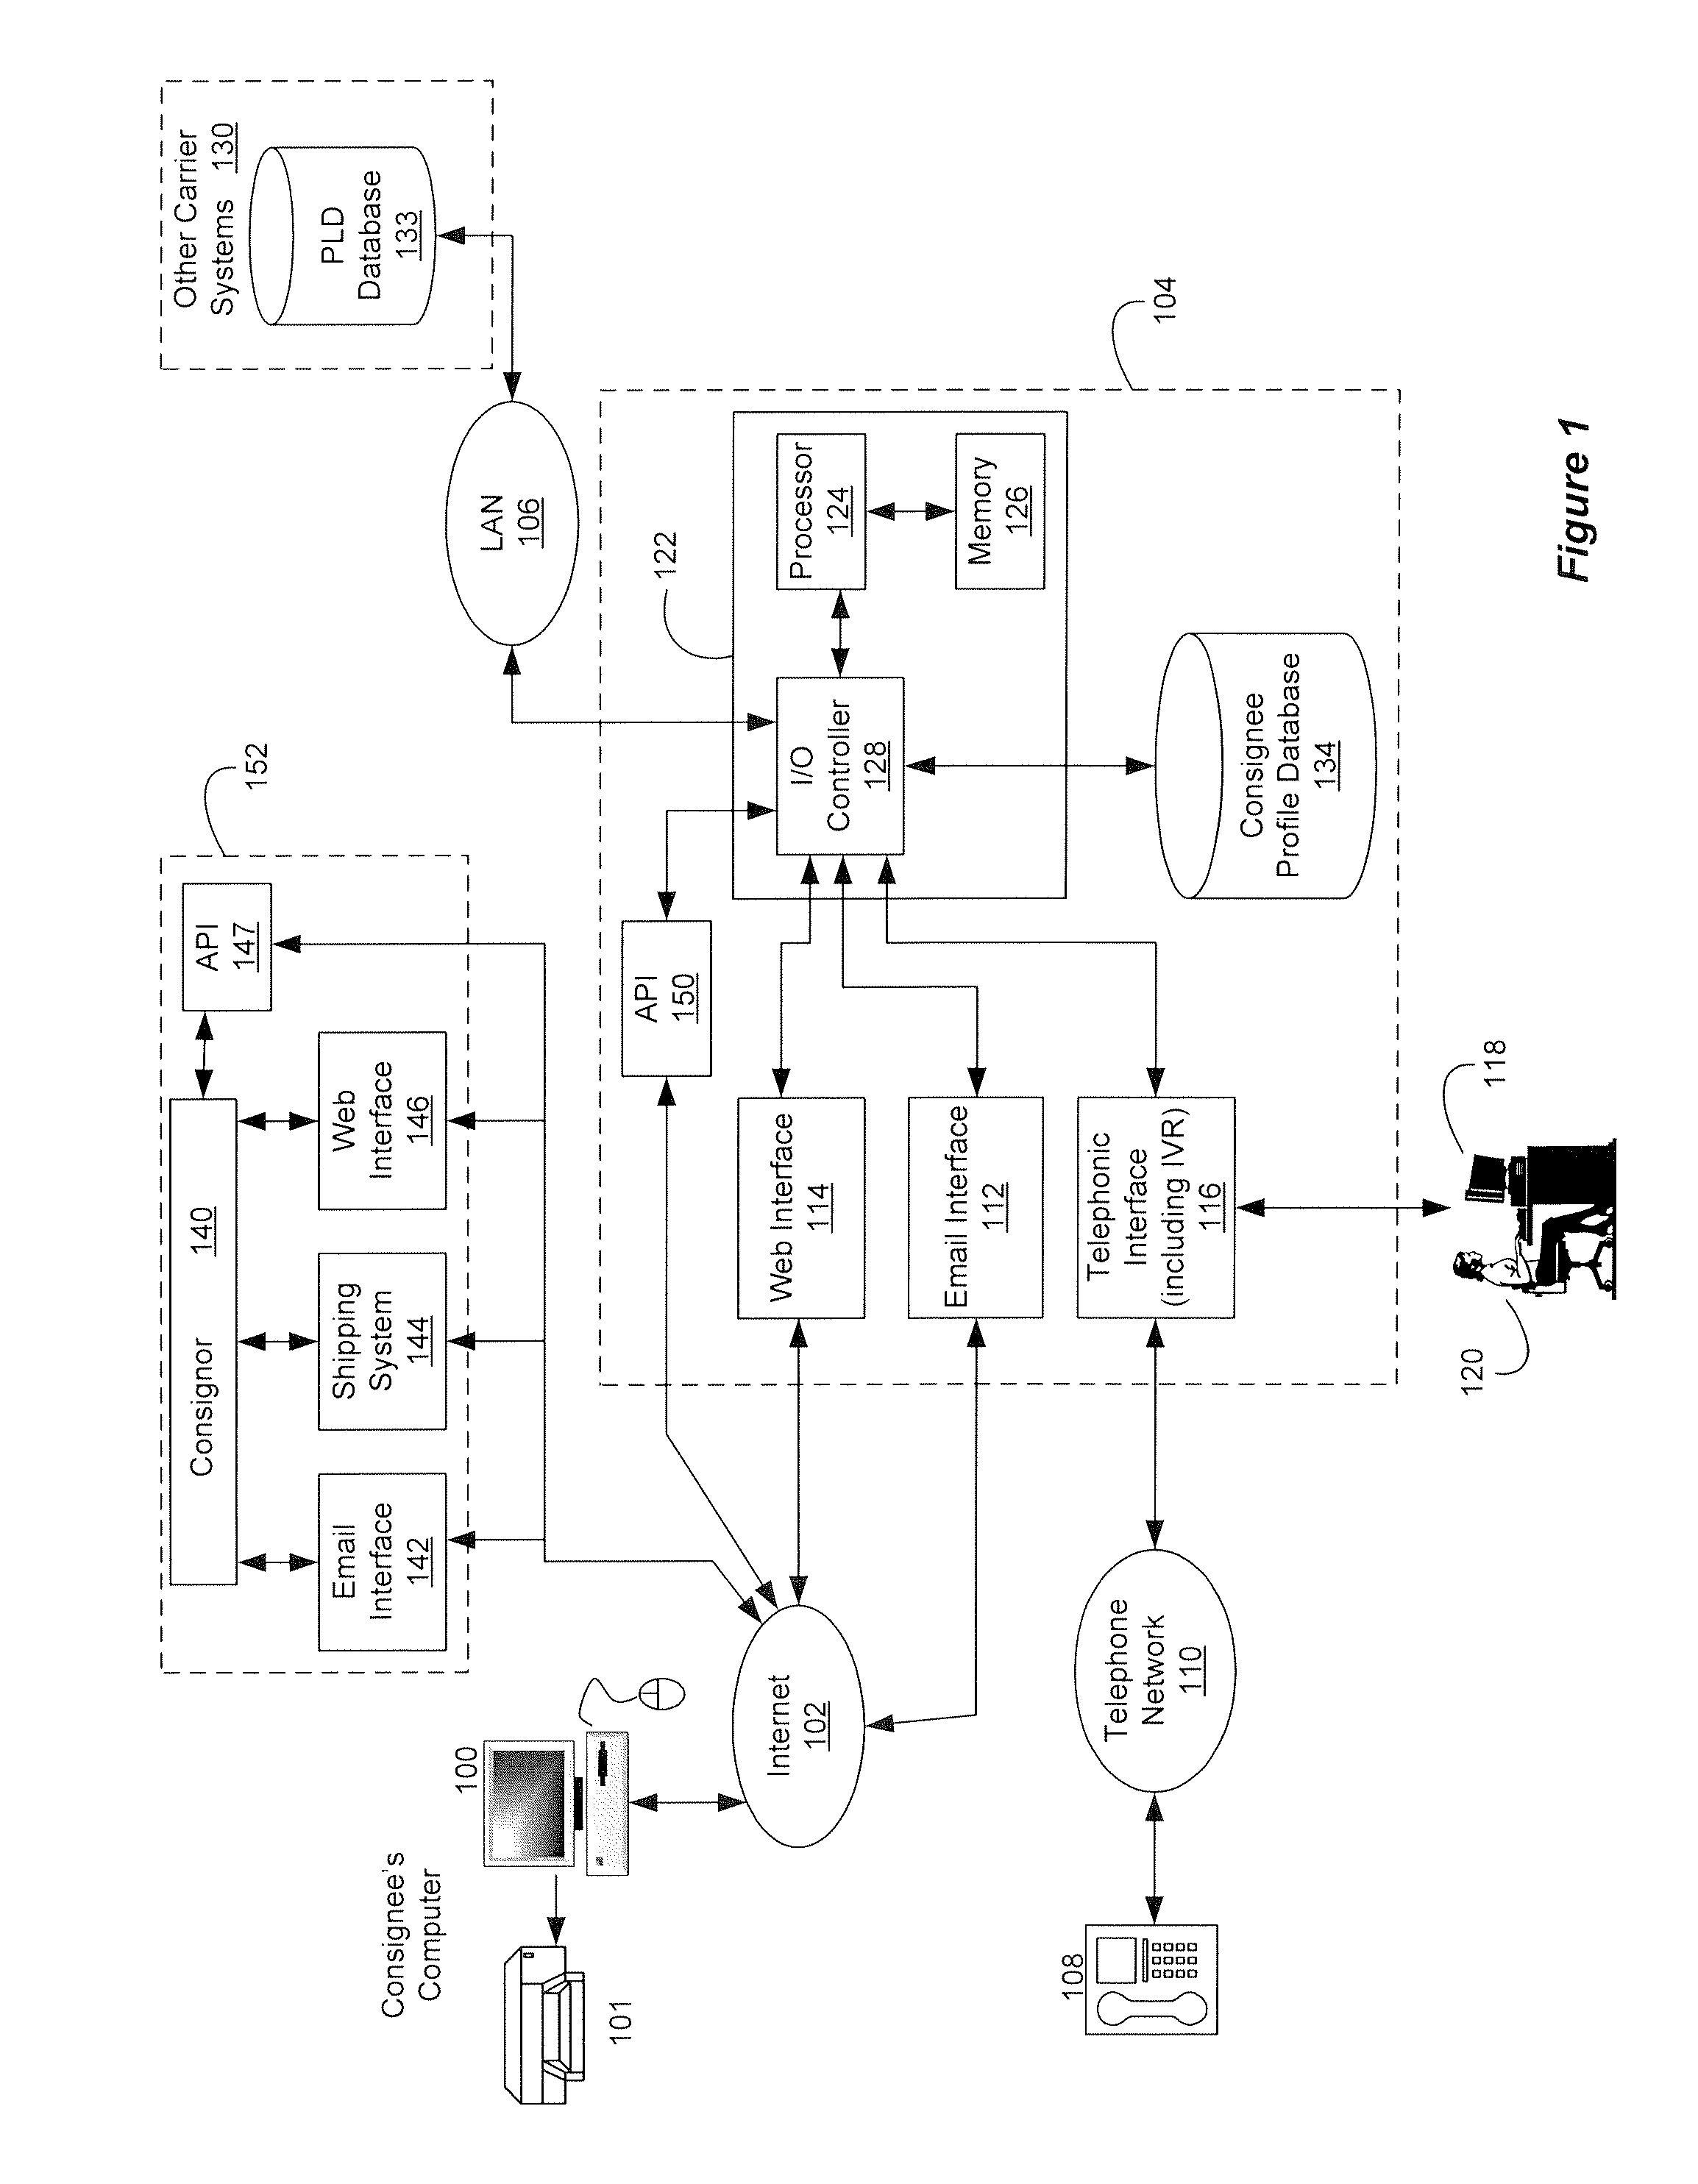 Systems and Methods for Providing Personalized Delivery Services